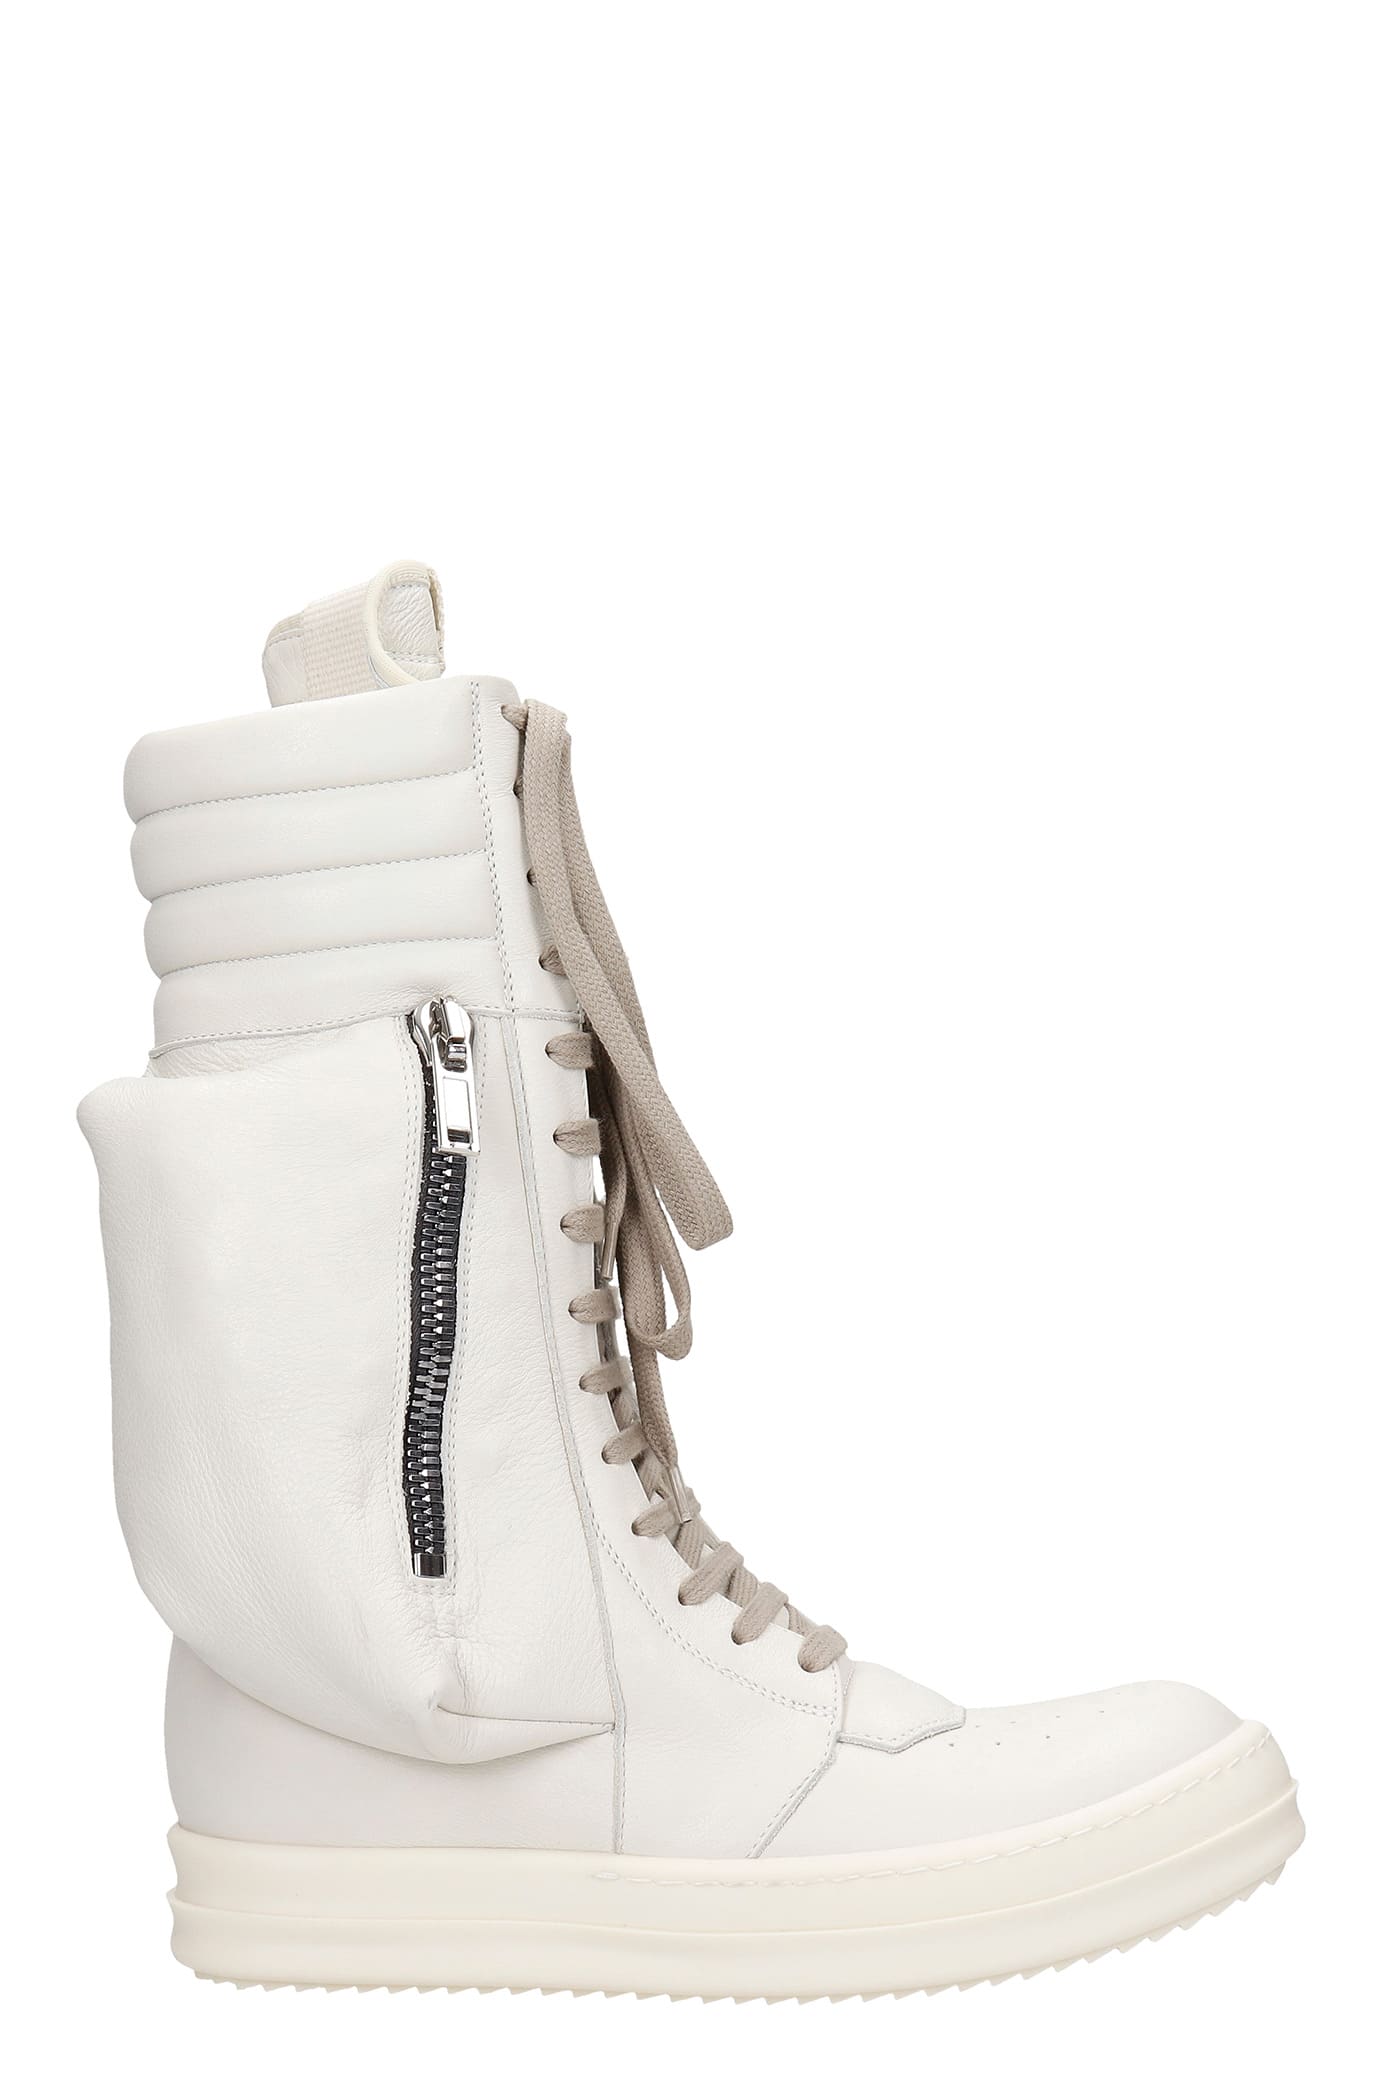 RICK OWENS CARGO BASKET SNEAKERS IN WHITE LEATHER,11935314